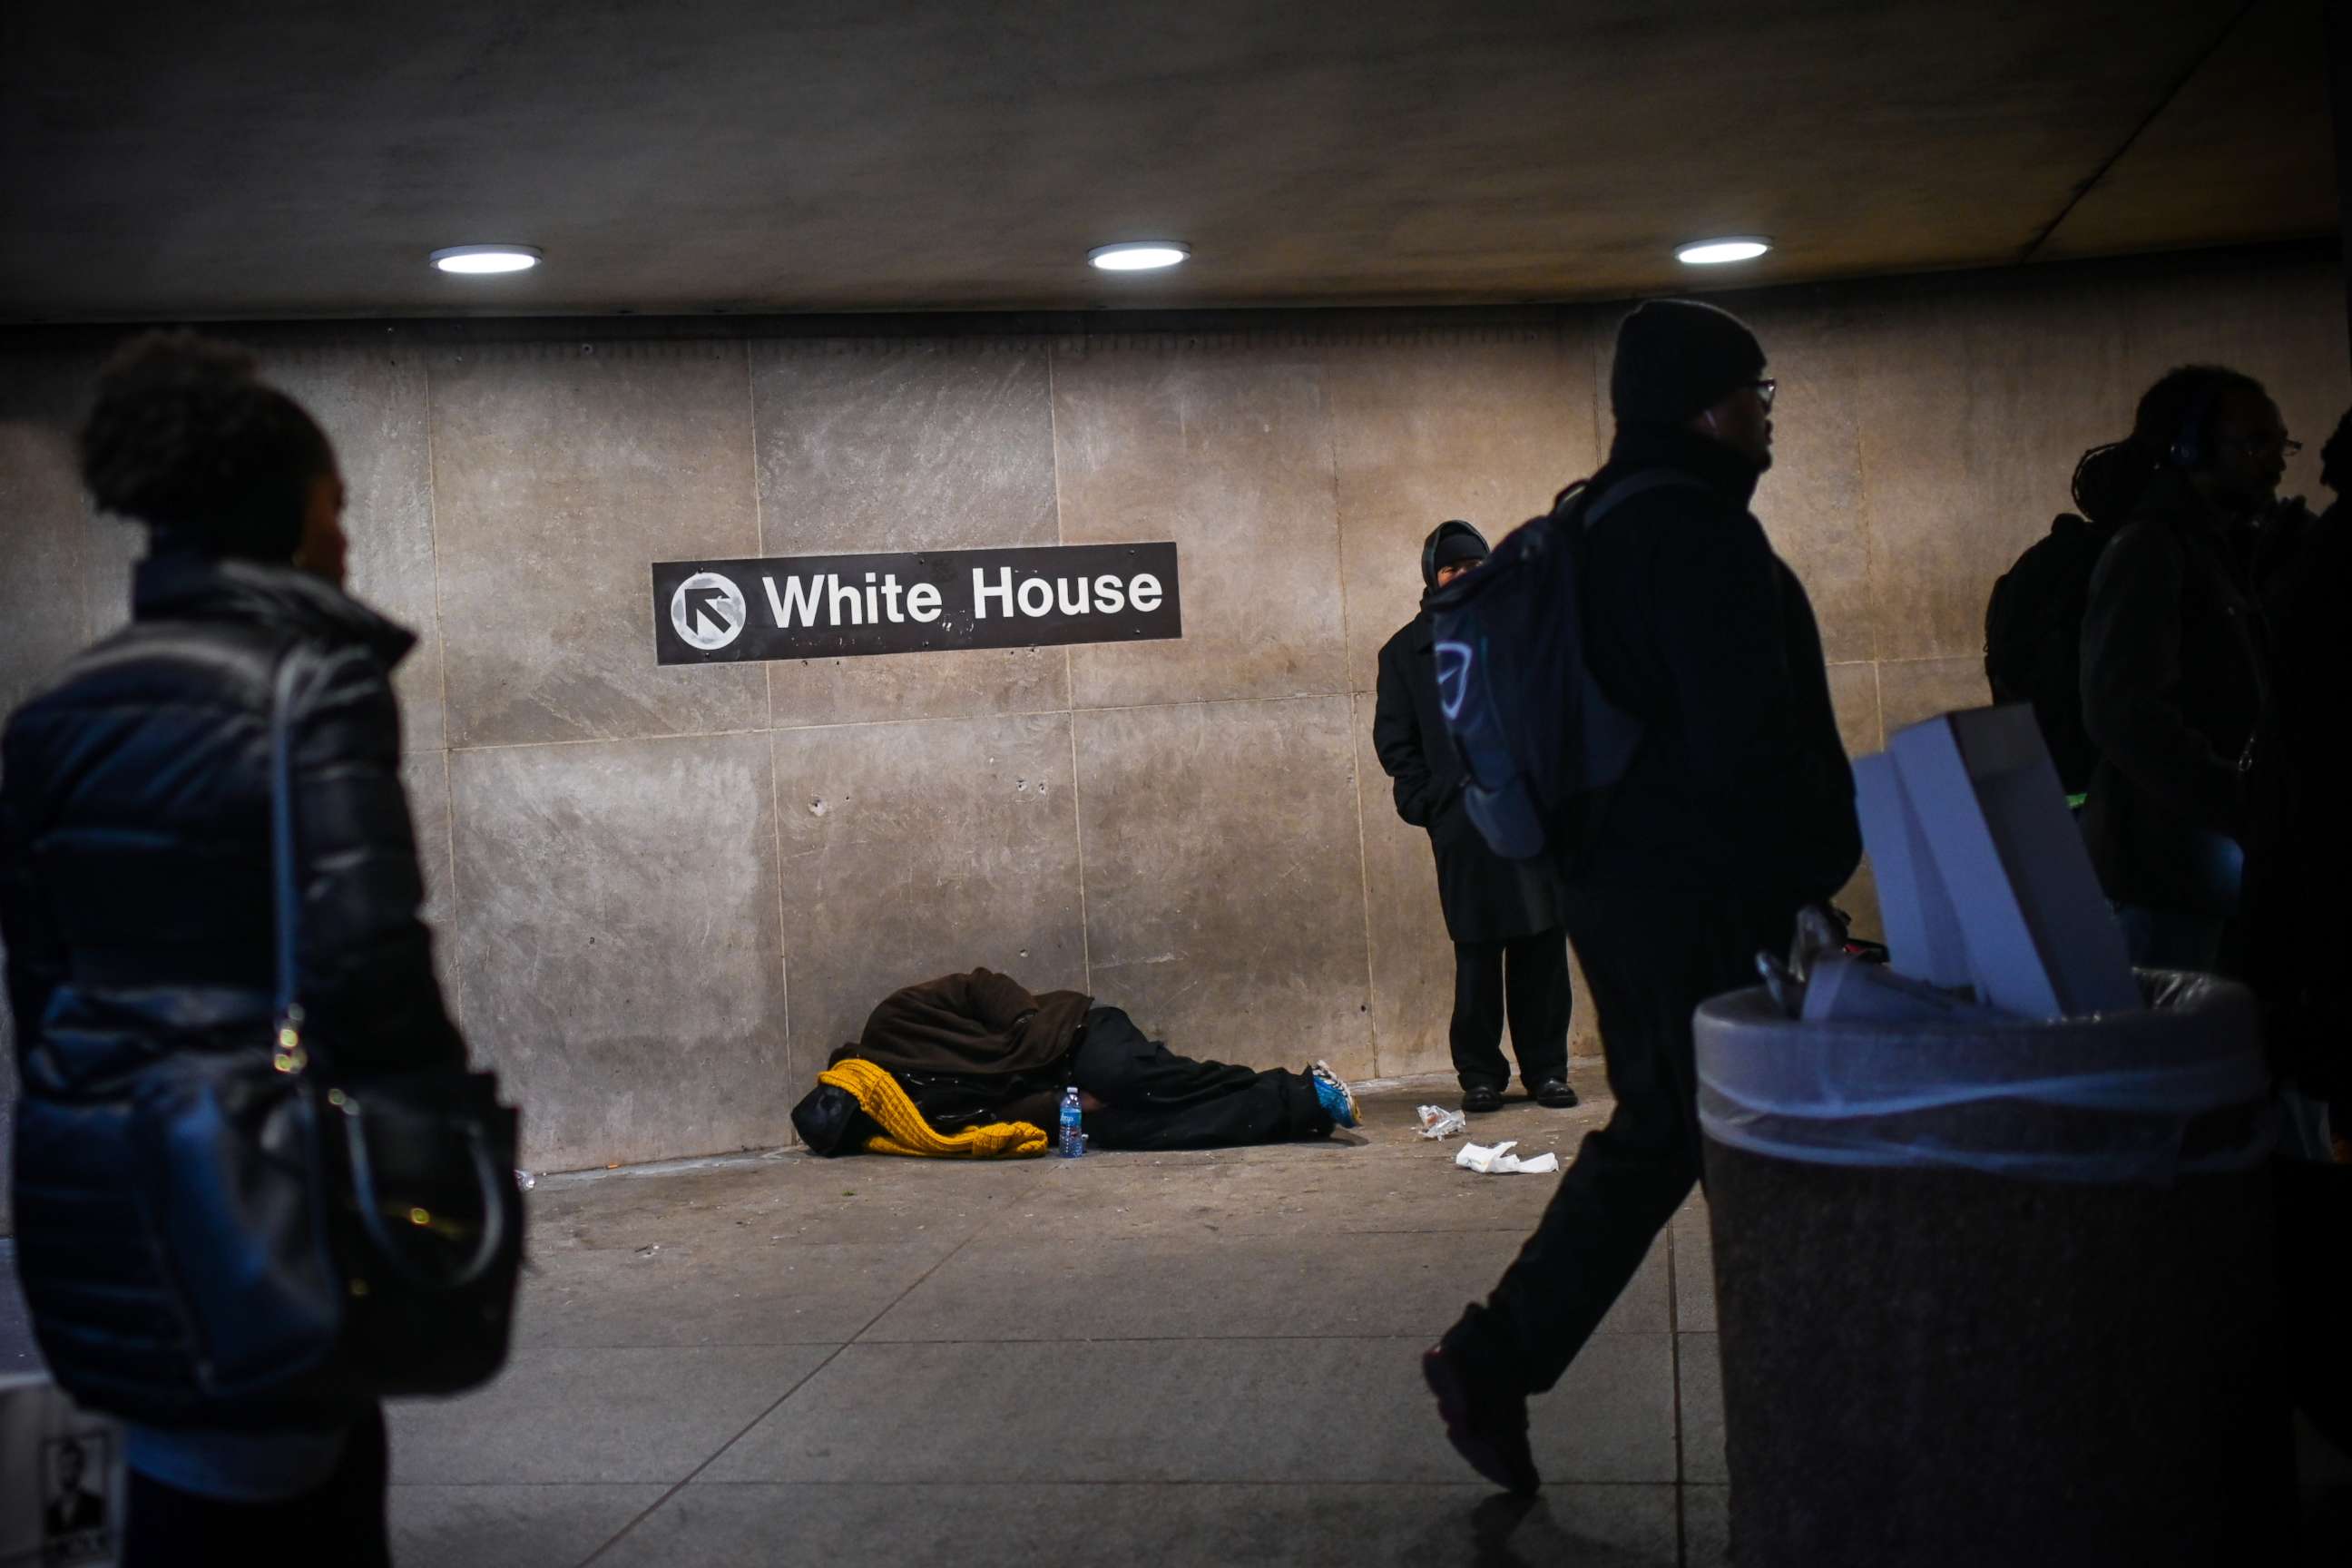 PHOTO: A homeless person sleeps below a sign indicating the exit to the White House at McPherson Square Metro station in Washington, Dec. 12, 2018.